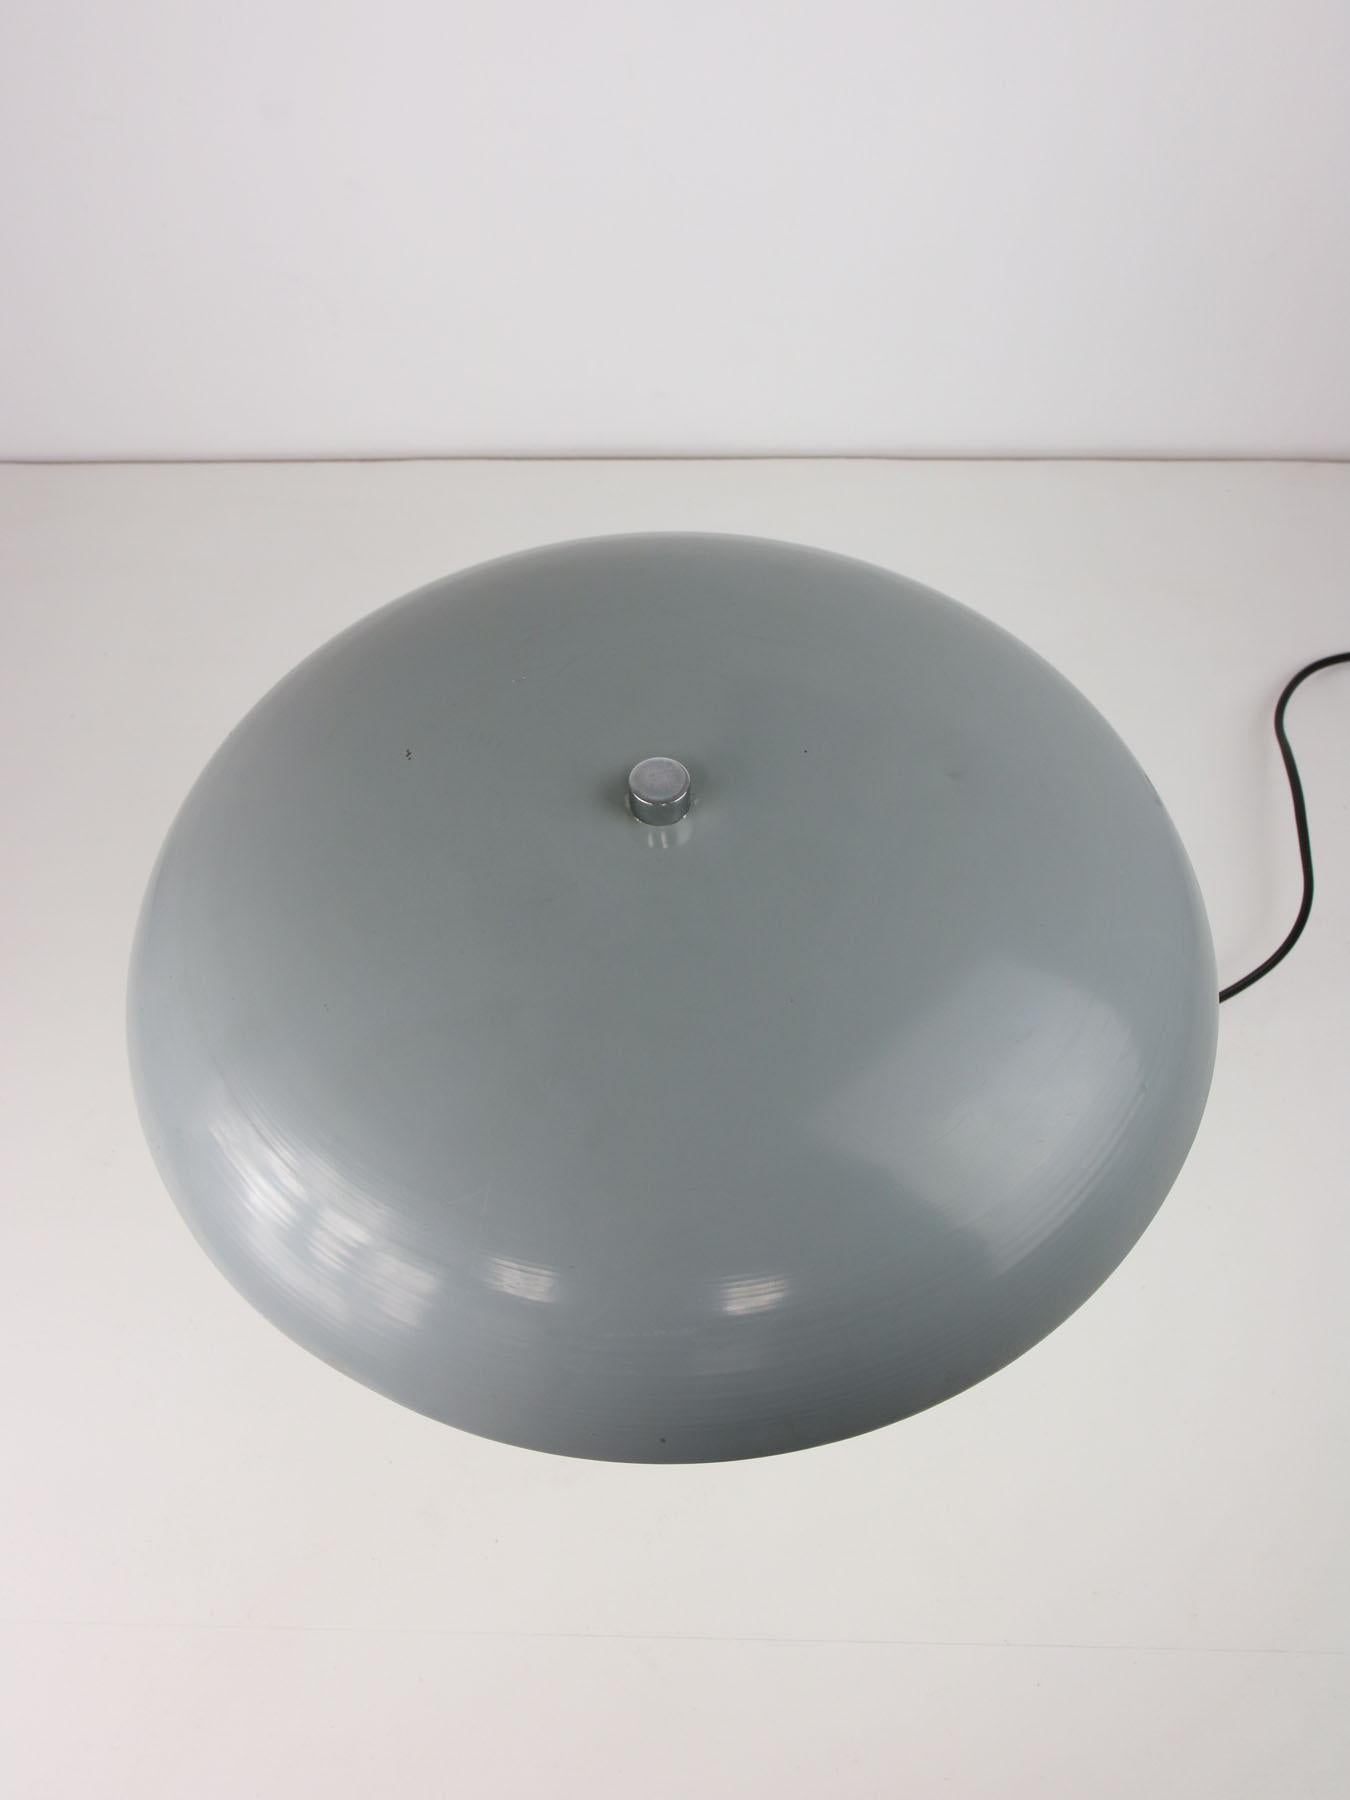 Bauhaus Saucer Table Lamp with Big Button For Sale 3